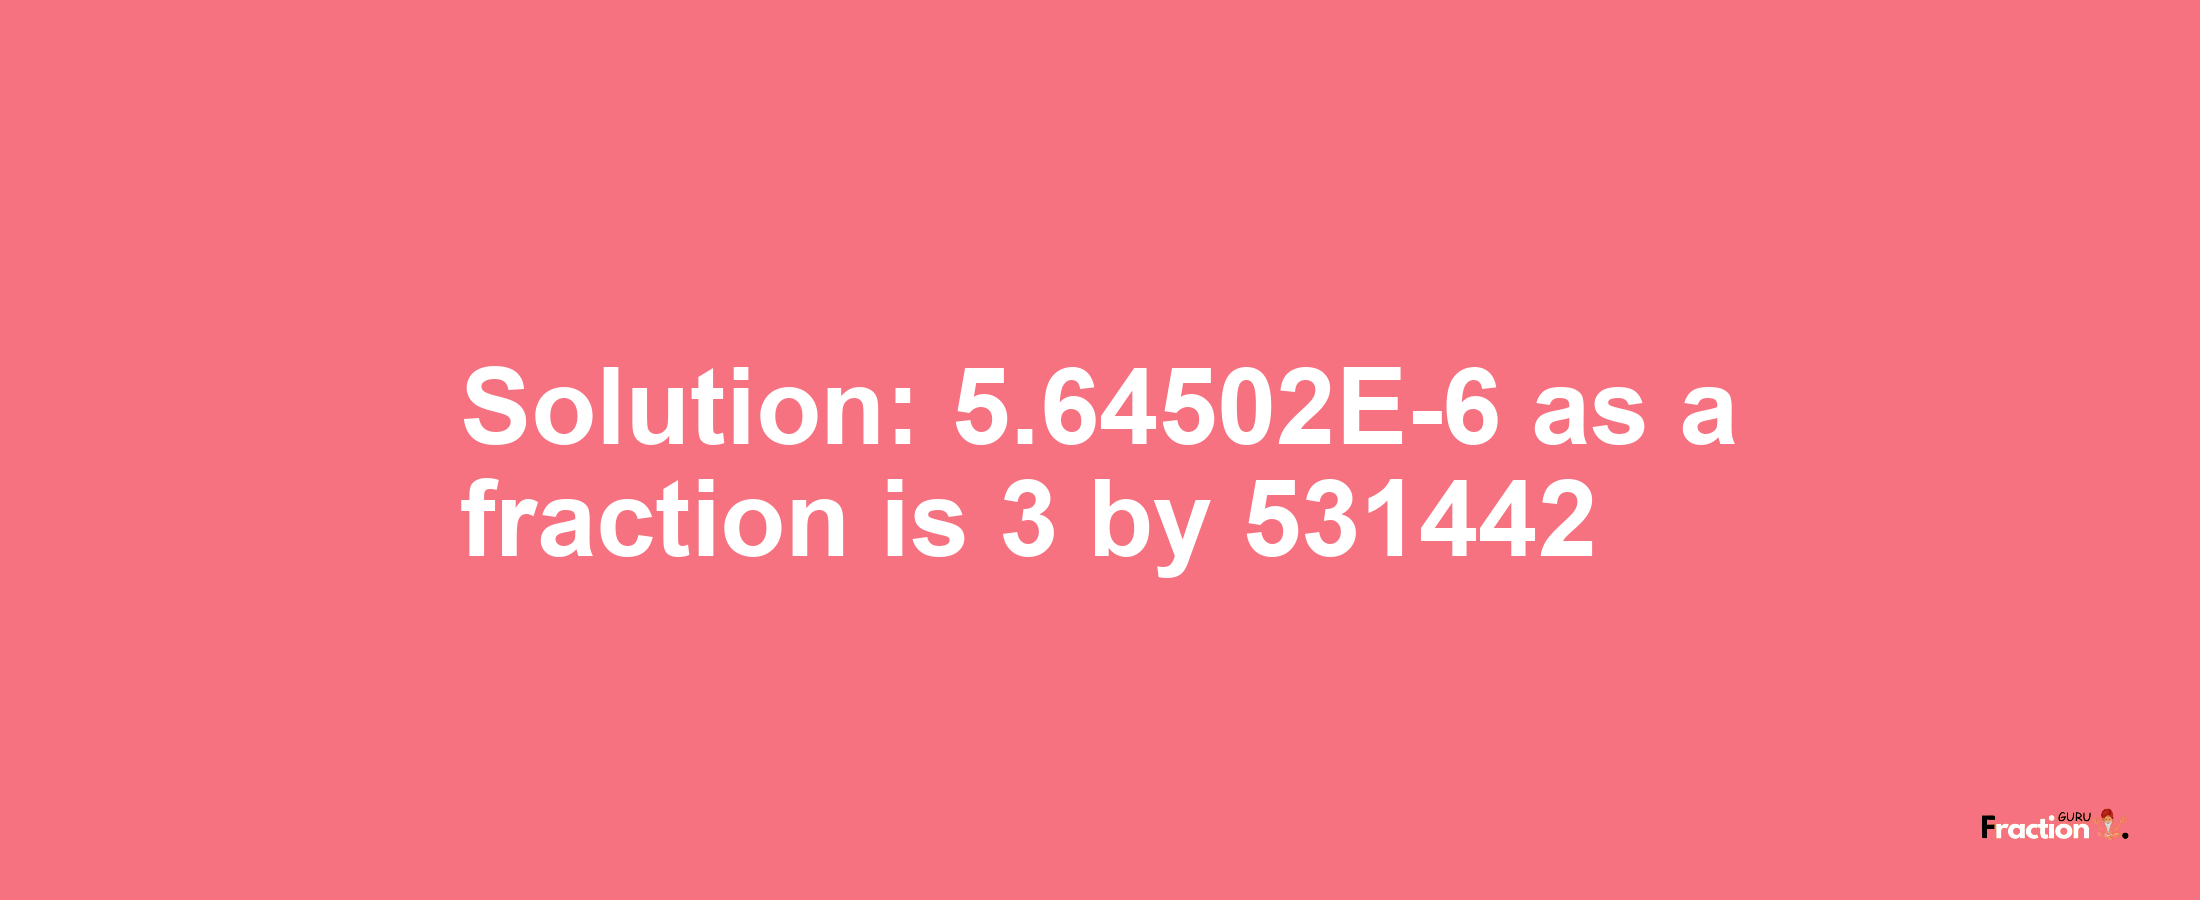 Solution:5.64502E-6 as a fraction is 3/531442